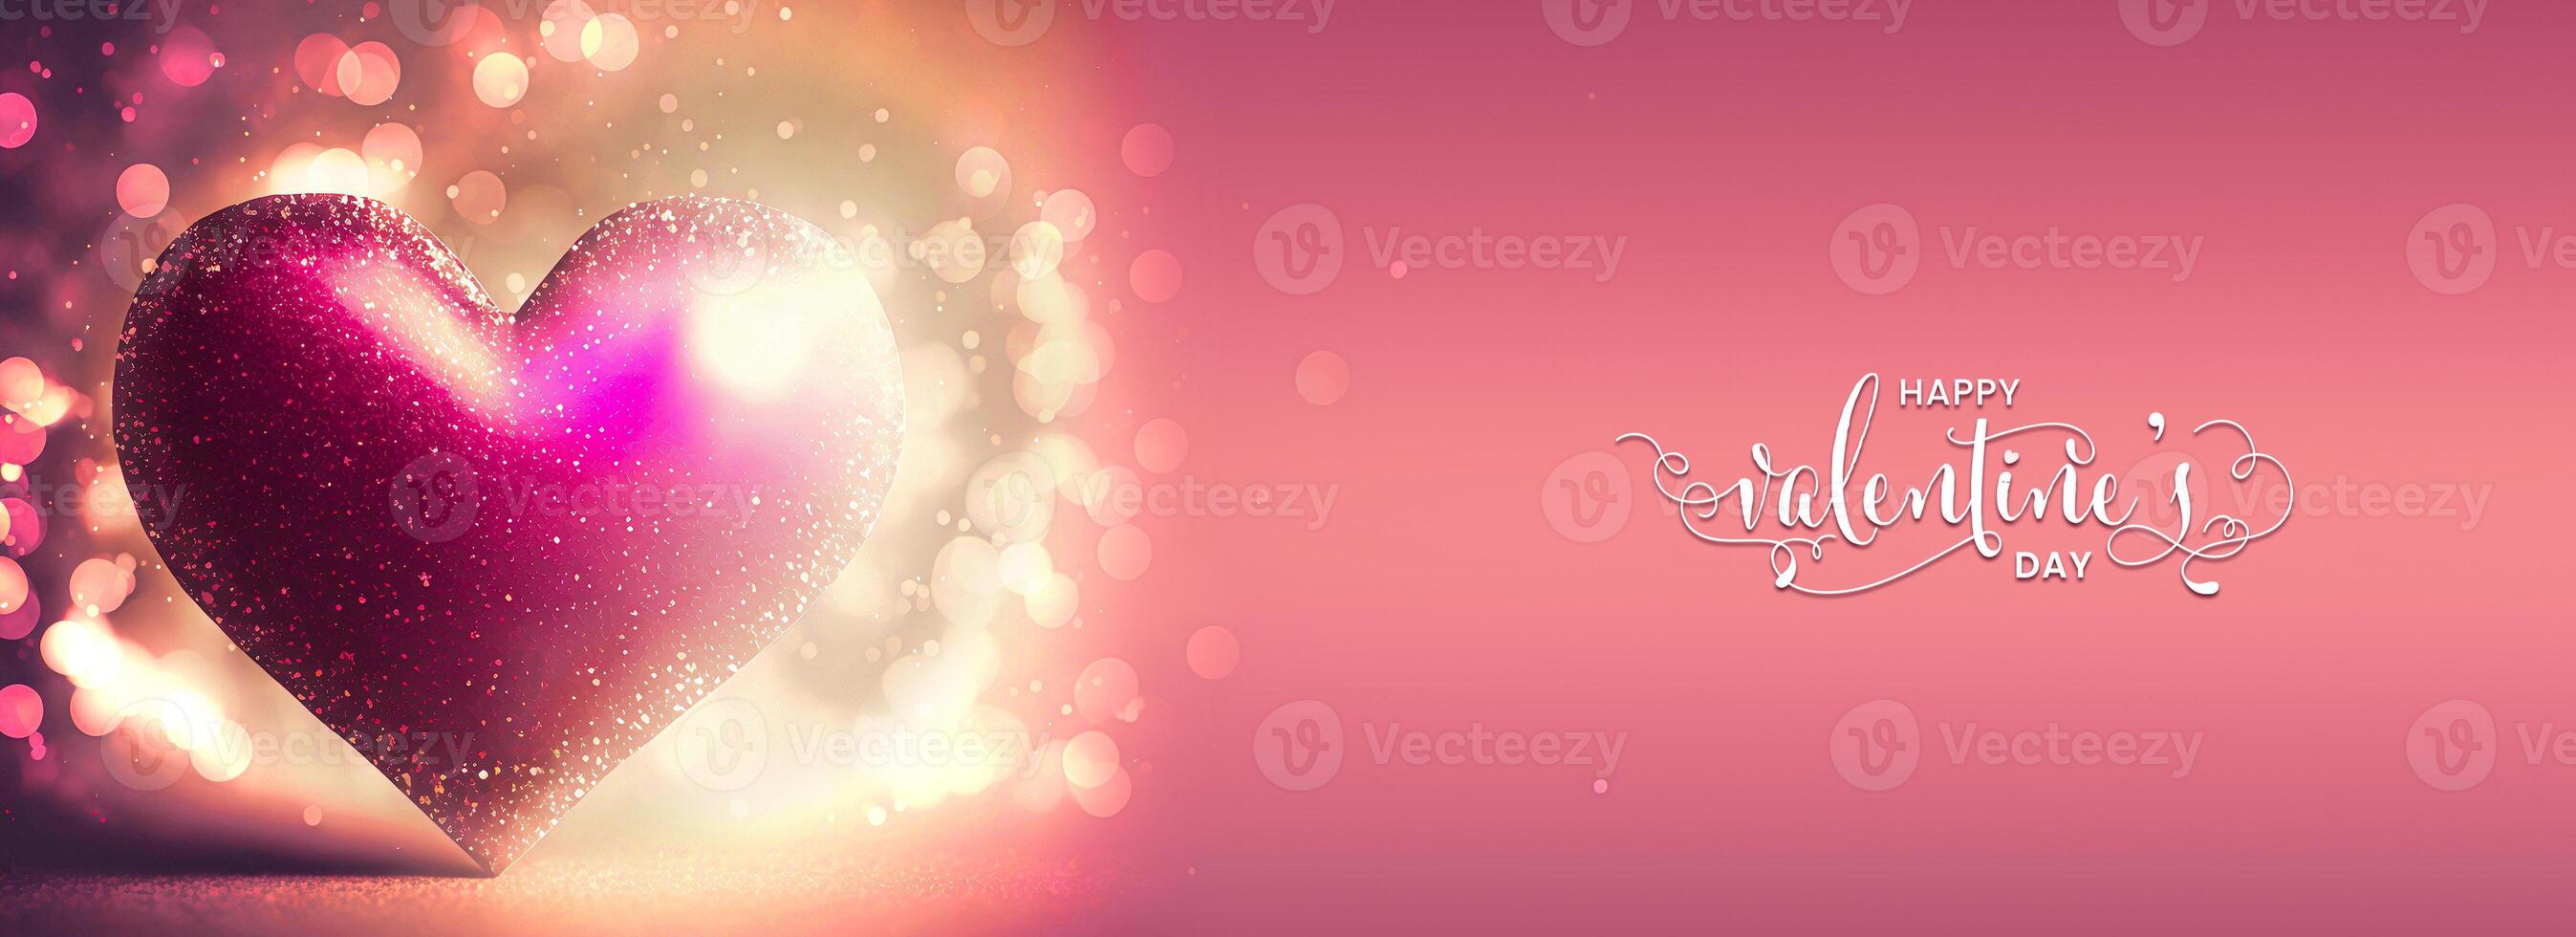 Happy Valentine's Day Text With 3D Render Of Shiny Pink Glittery Heart Shape On Bokeh Background. photo